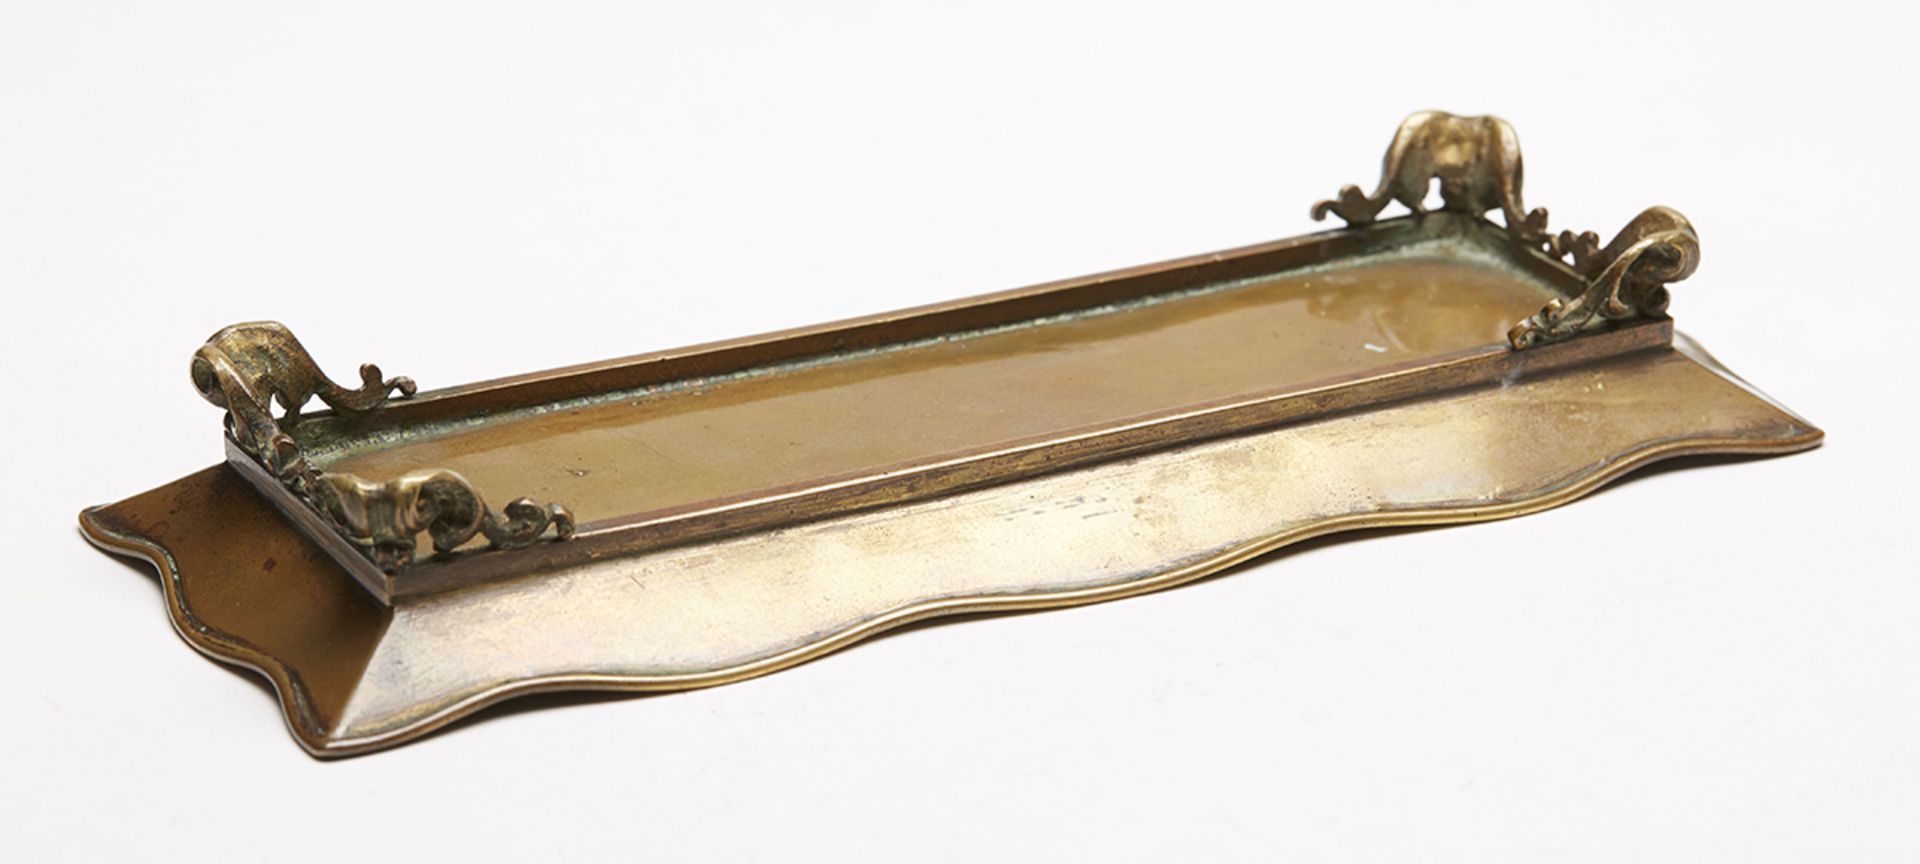 ARTS & CRAFTS ENGRAVED BRASS DESK PEN TRAY c.1890   DIMENSIONS   Length 22cm, Height 3cm   CONDITION - Image 7 of 7